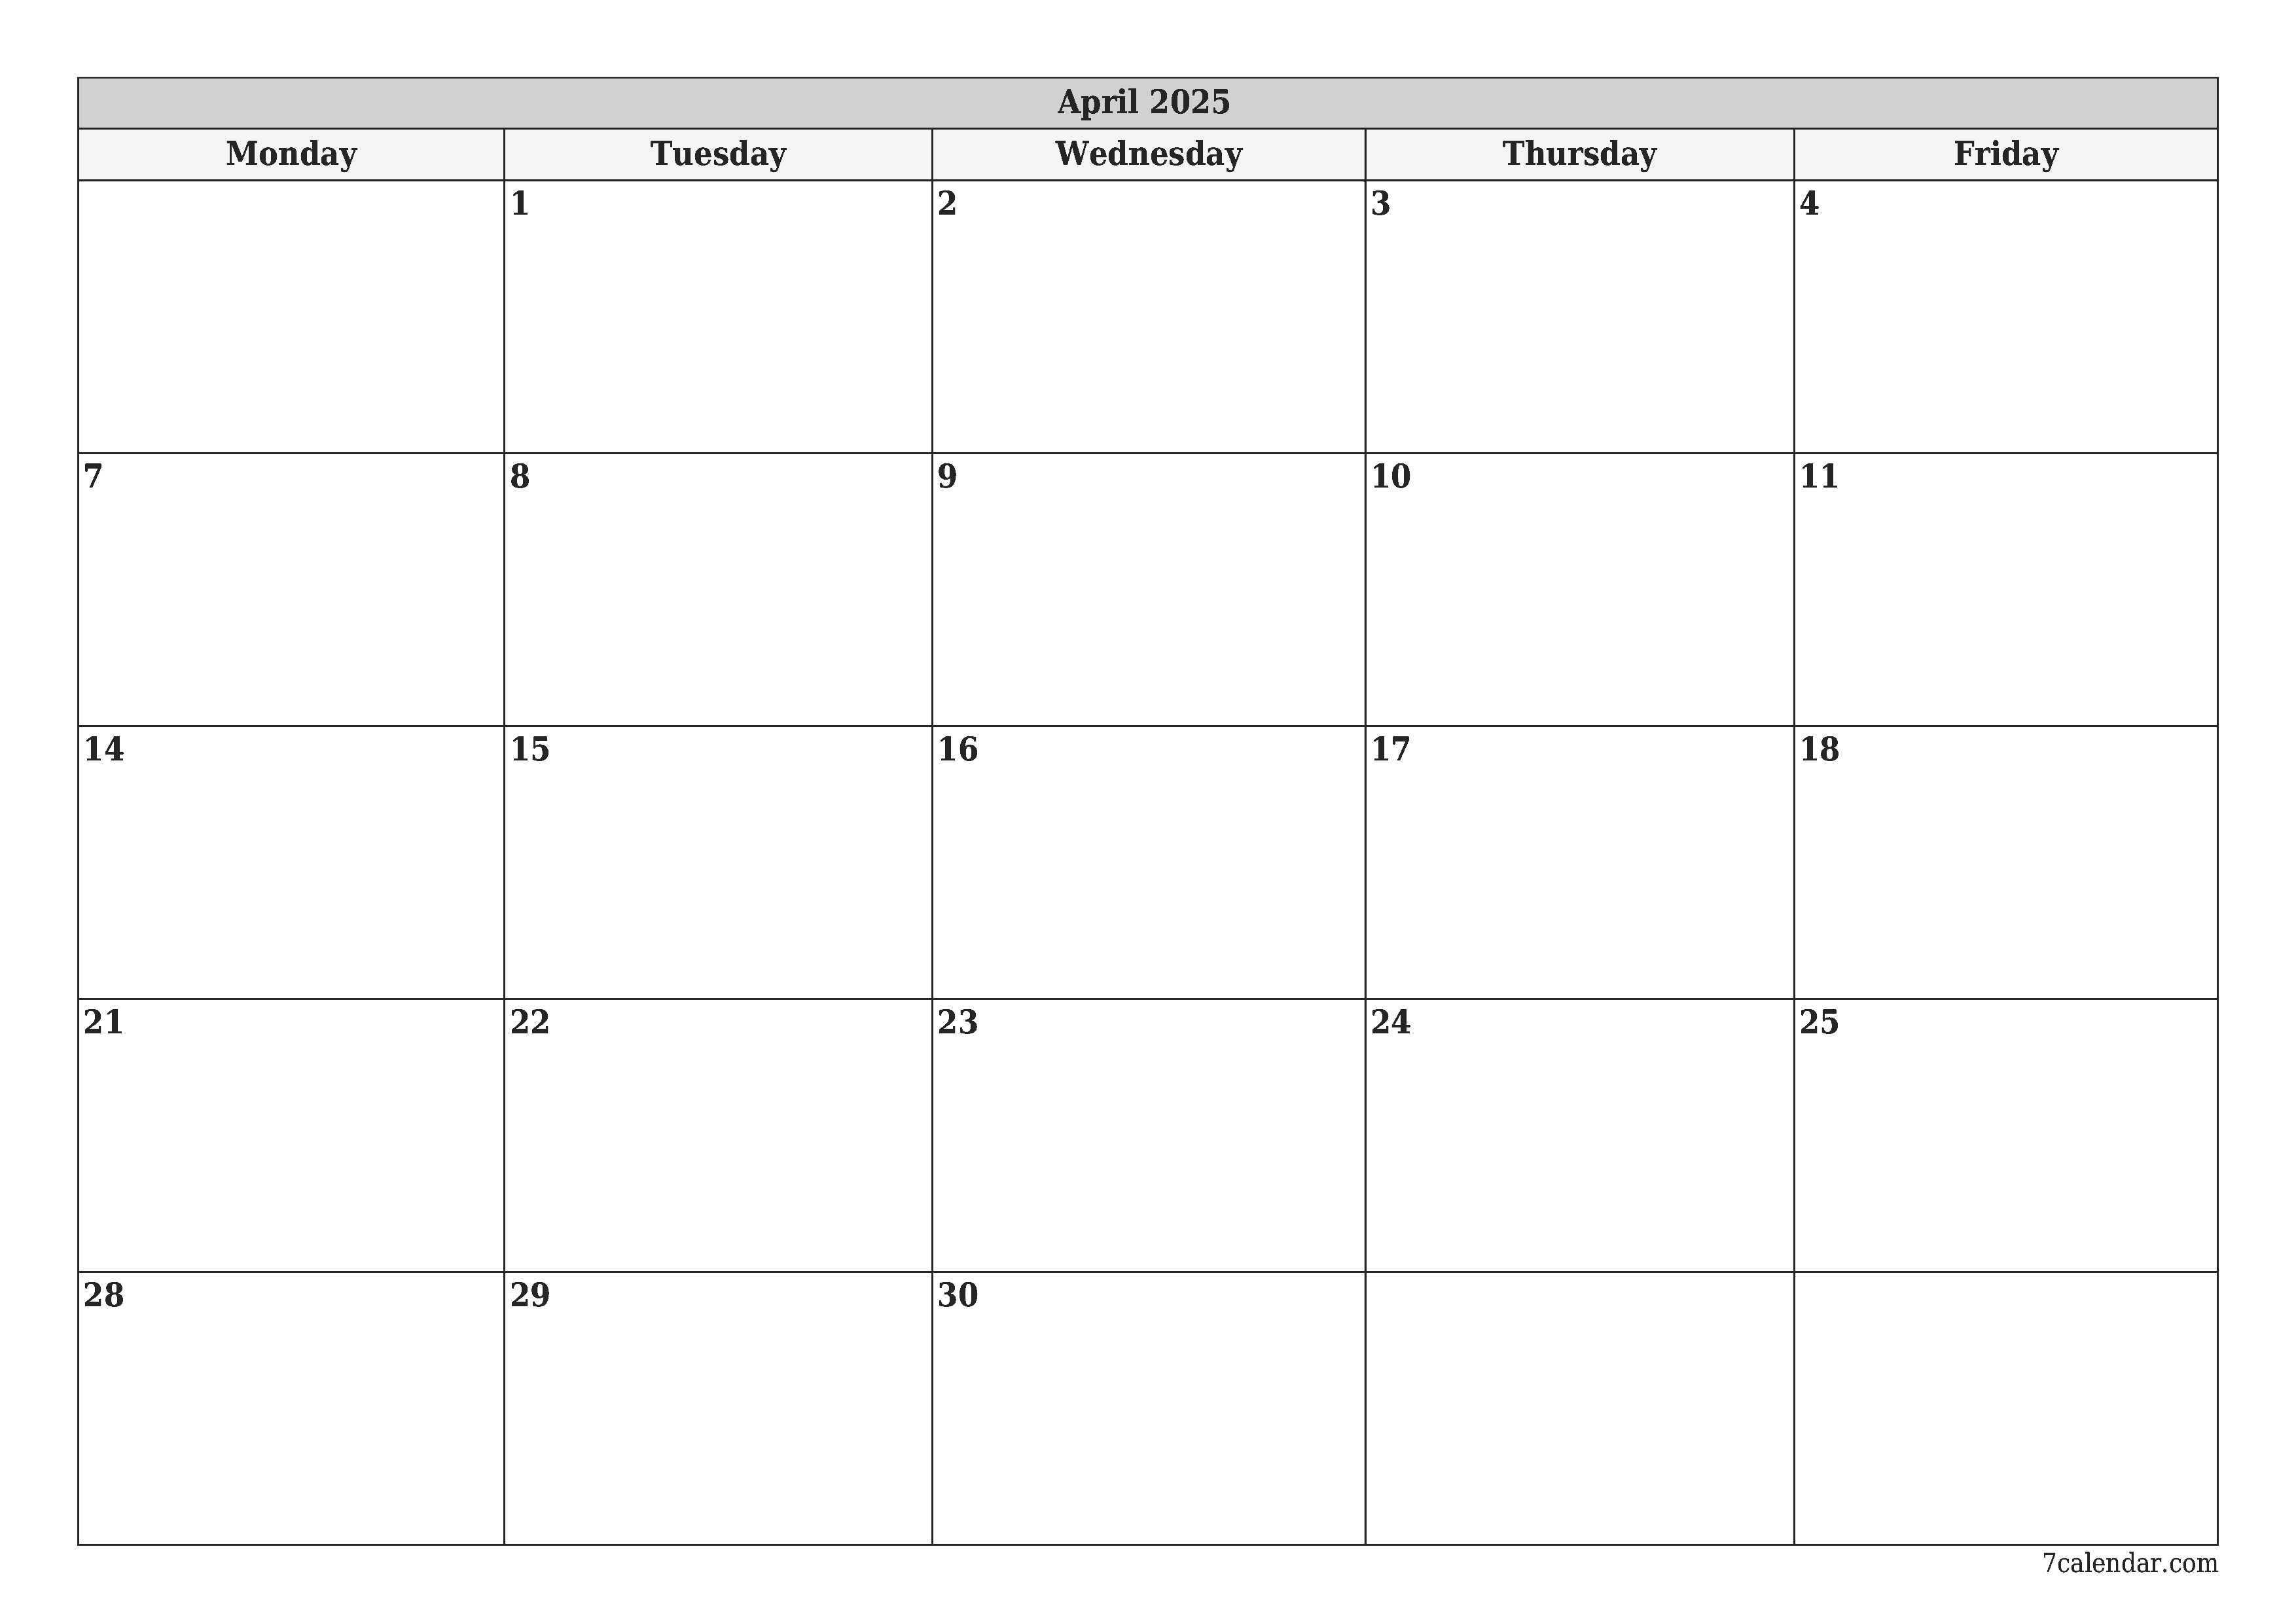 printable wall template free horizontal Monthly planner calendar April (Apr) 2025